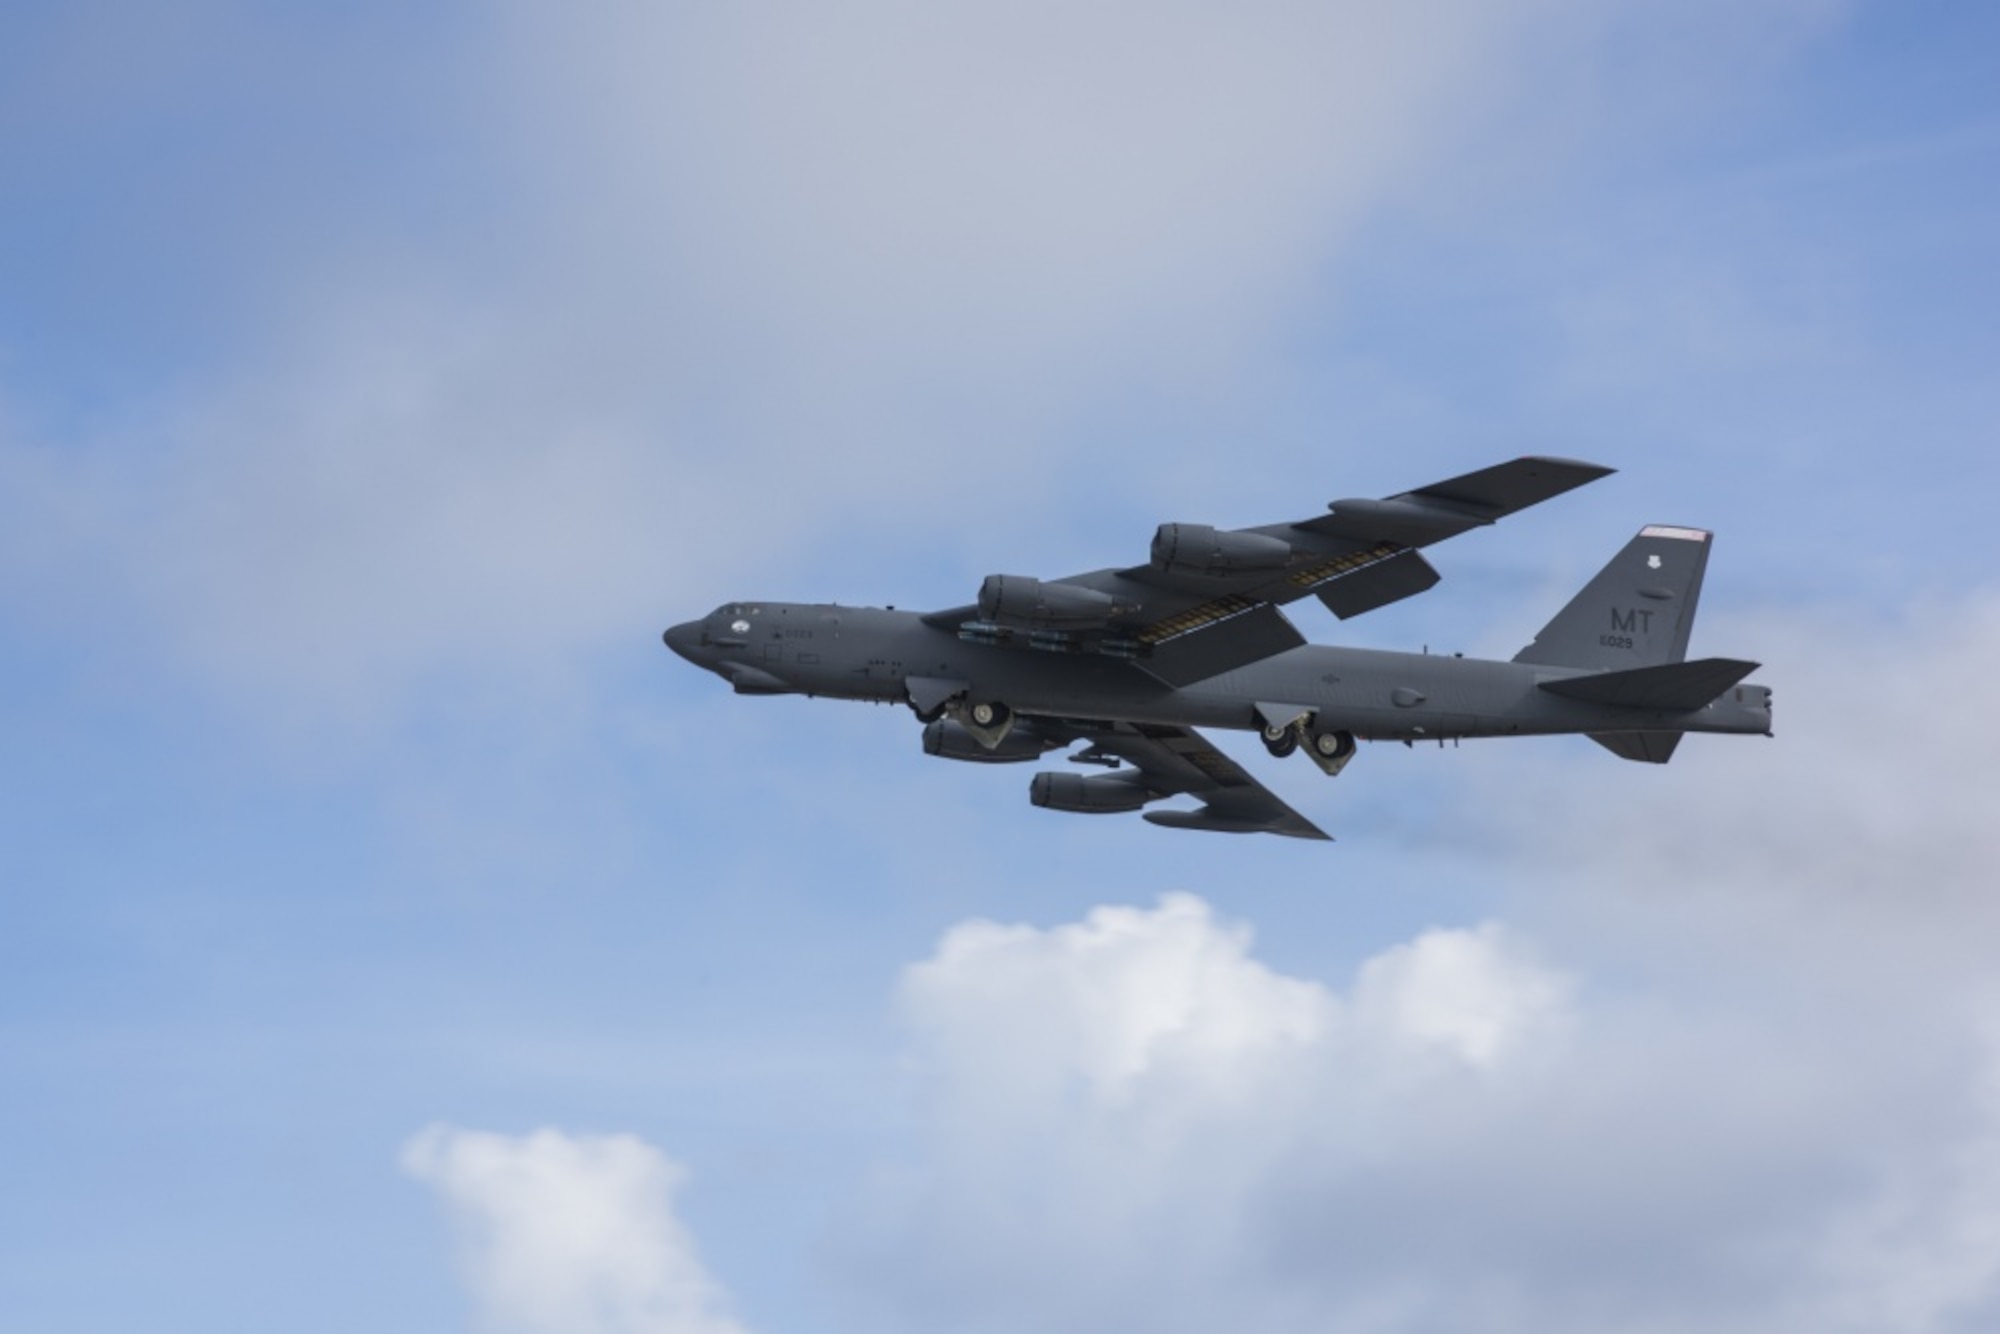 A B-52 Stratofortress from the 69th Expeditionary Bomber Squadron takes off from Andersen Air Force Base, Guam Aug. 13, 2019.